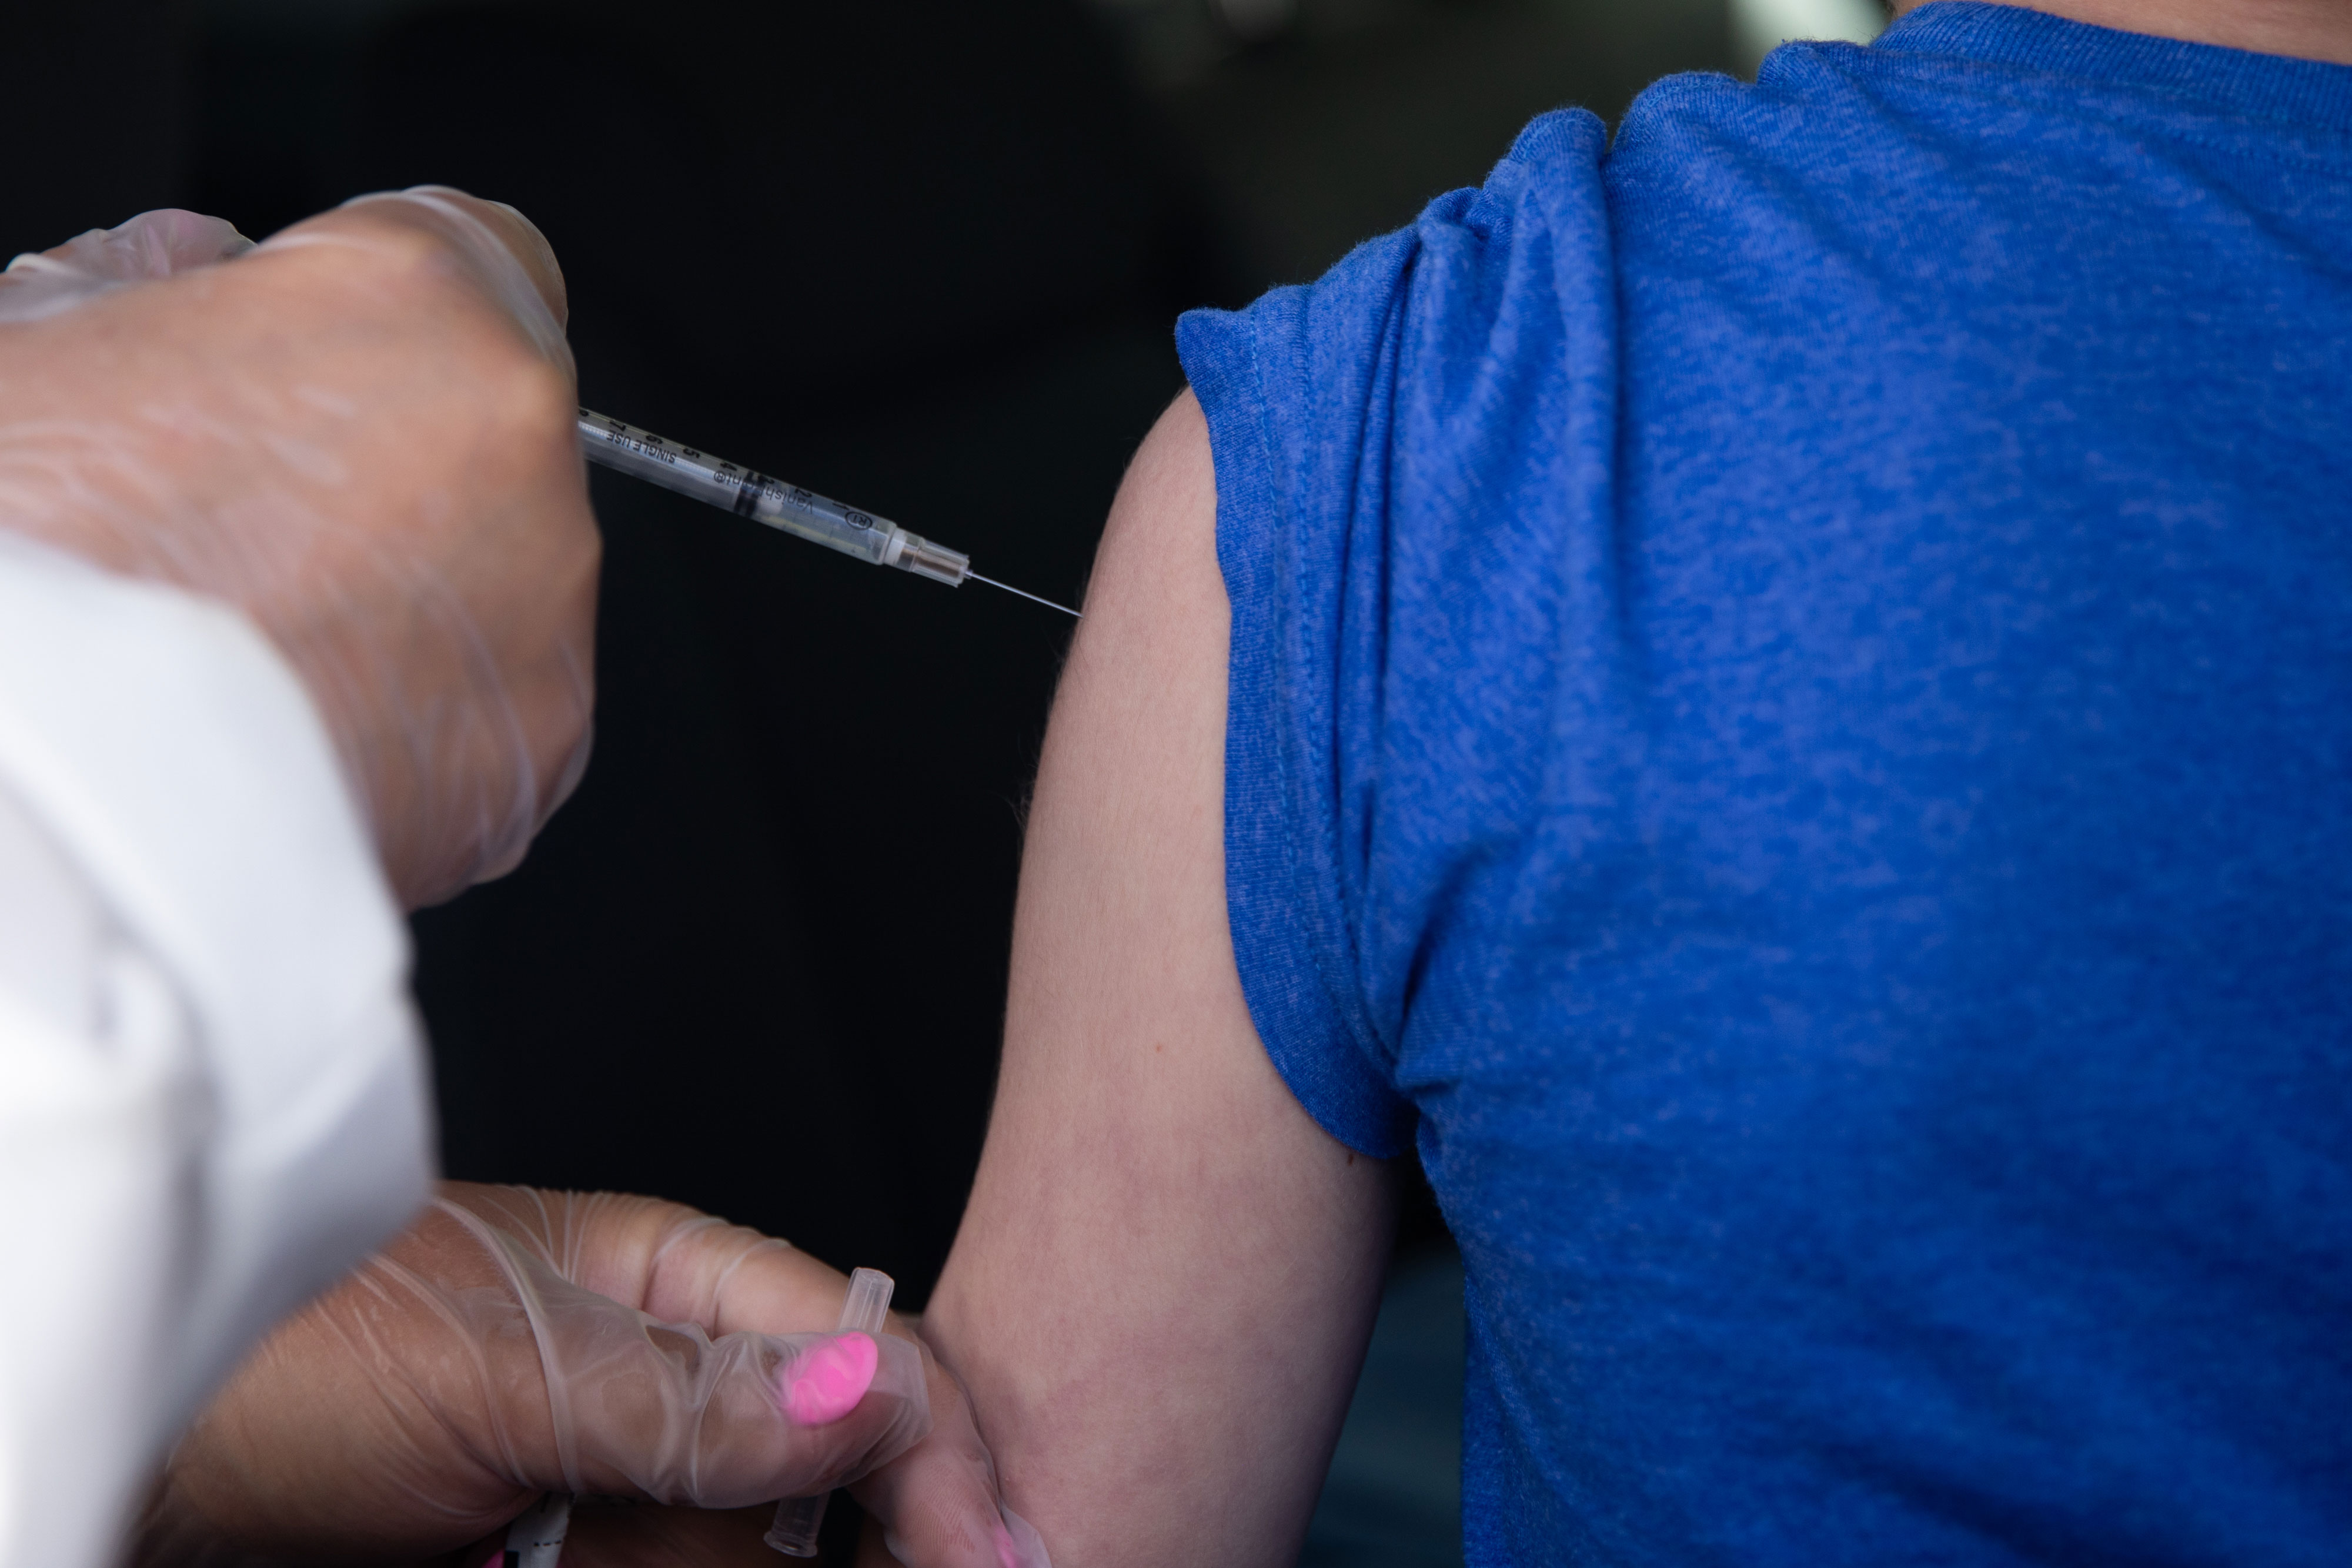 A child receives a dose of a Covid-19 vaccine in Farmington Hills, Michigan, on May 13.